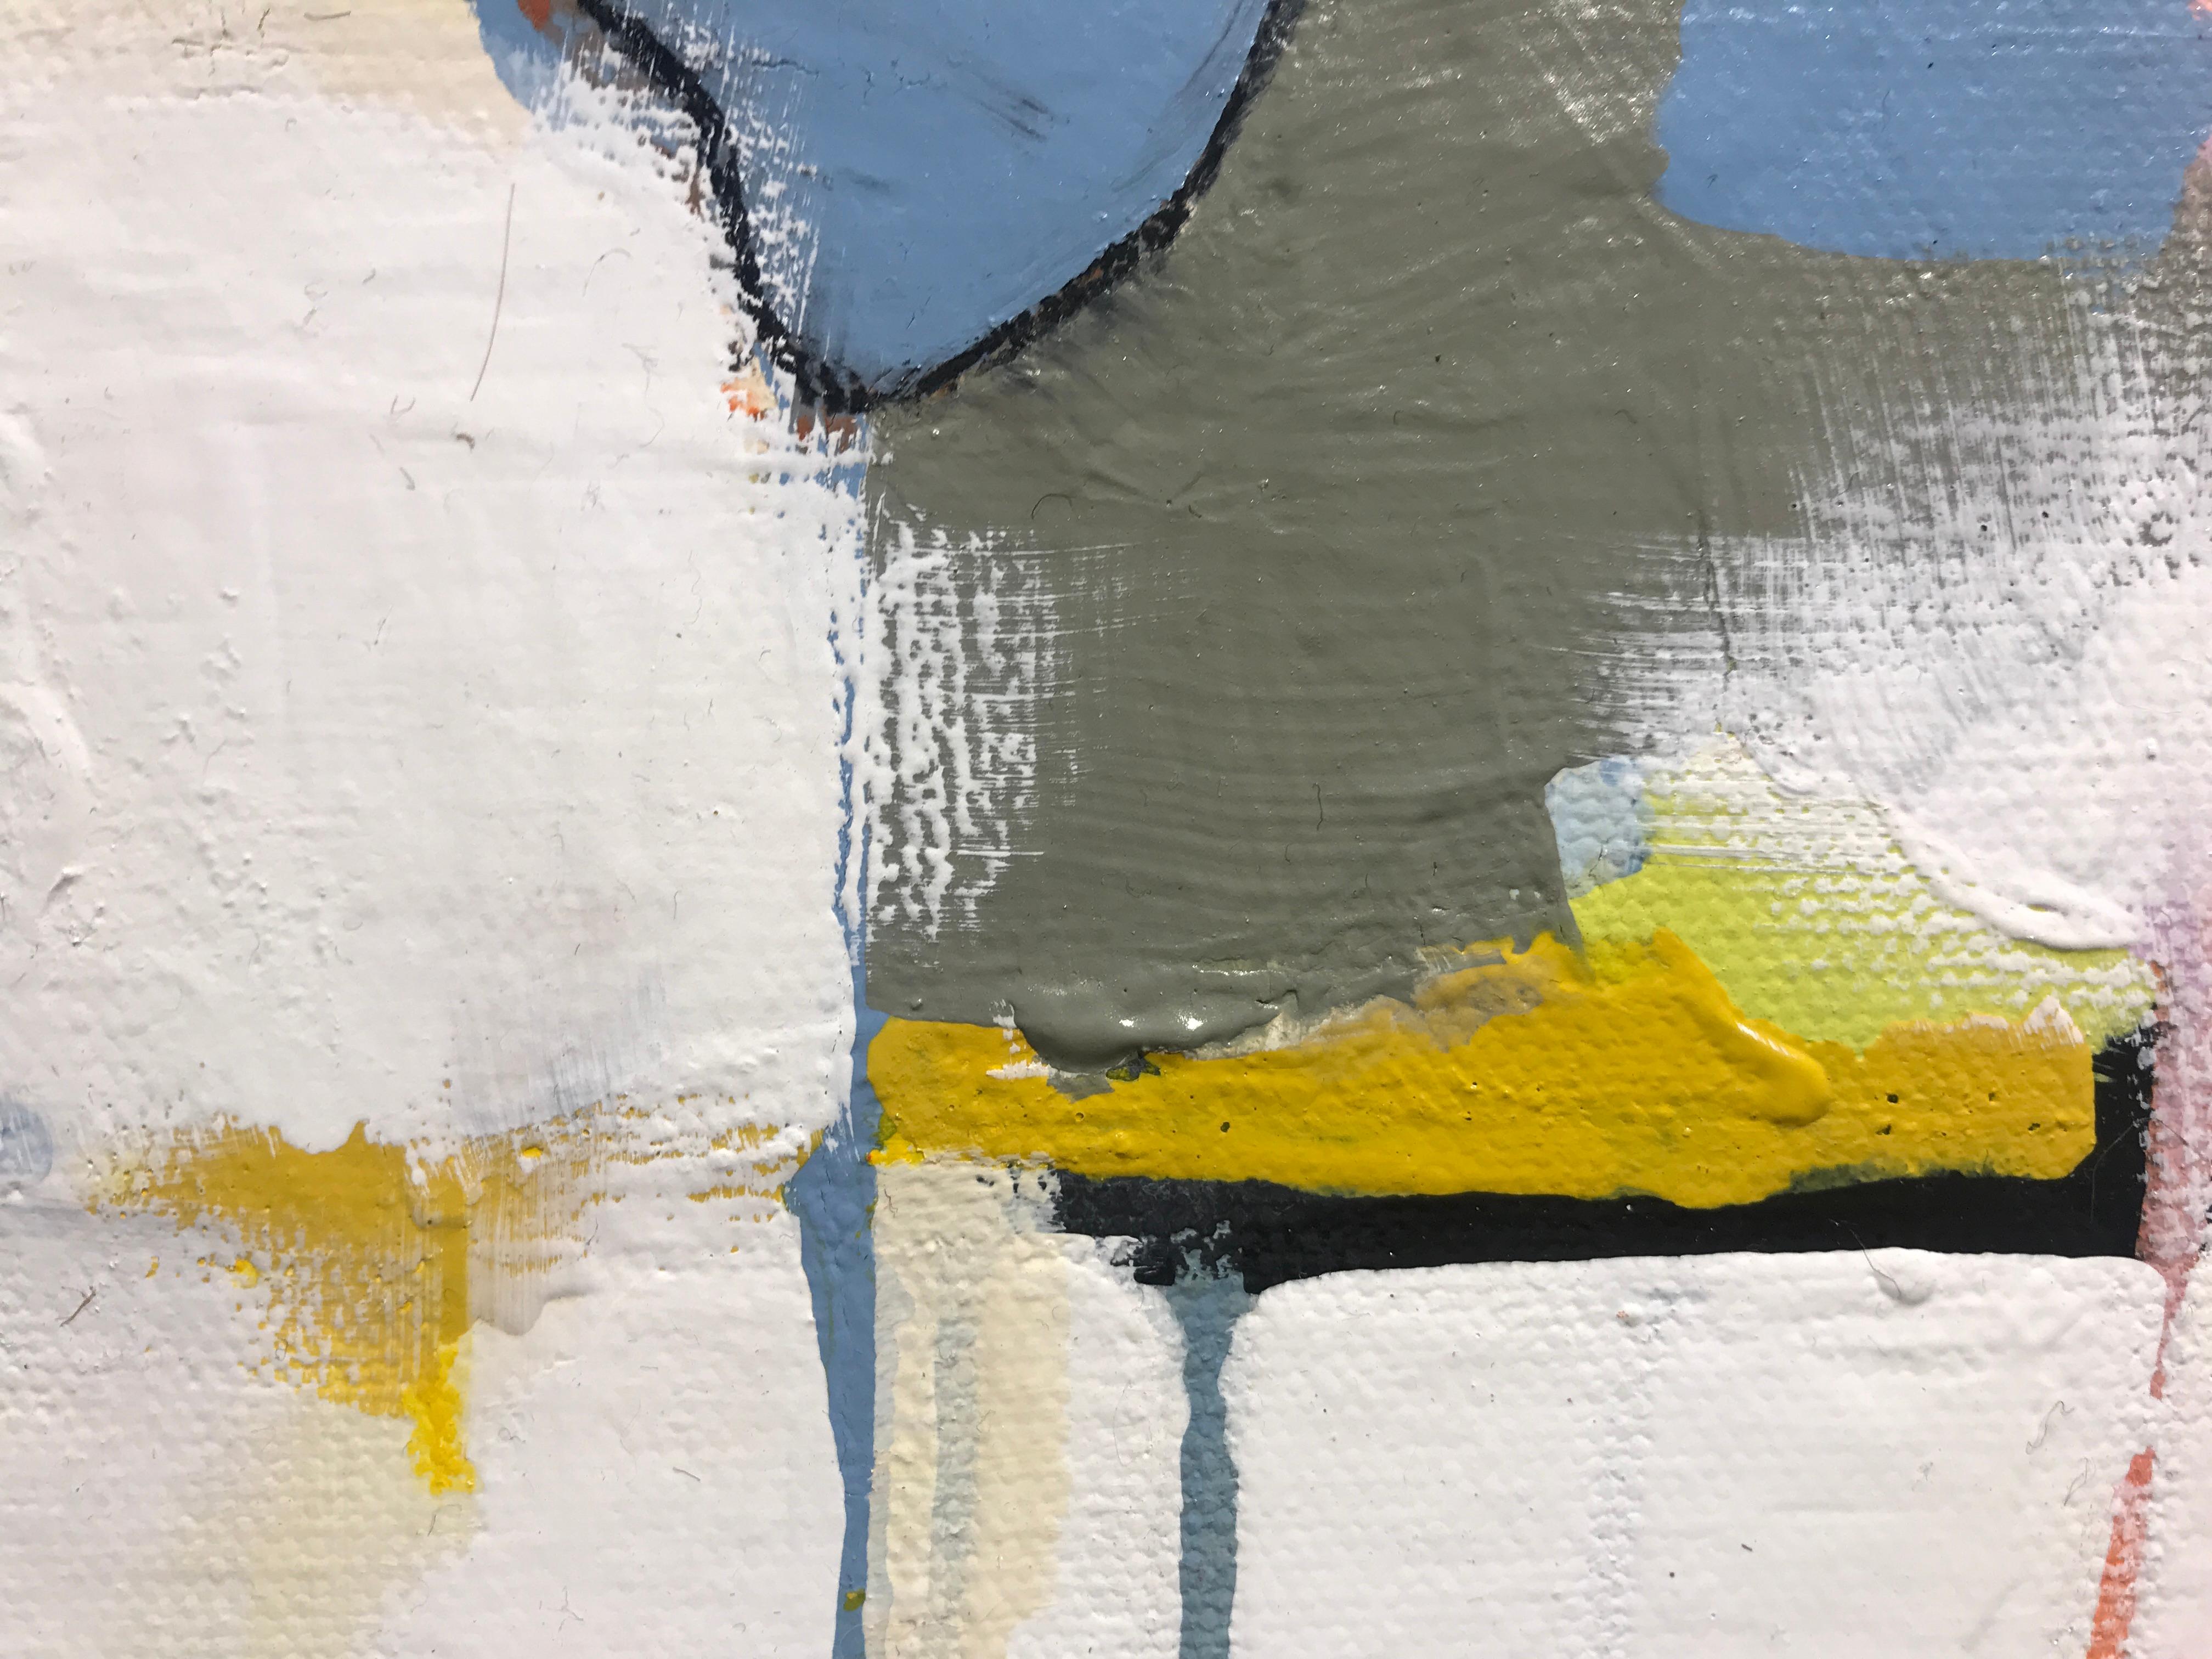 'Abstracted 01' is a small acrylic and charcoal on canvas abstract painting created by American artist Annie King is 2018. Featuring a palette made of blue, yellow and white colors accented with touches of red, black and green among others, the